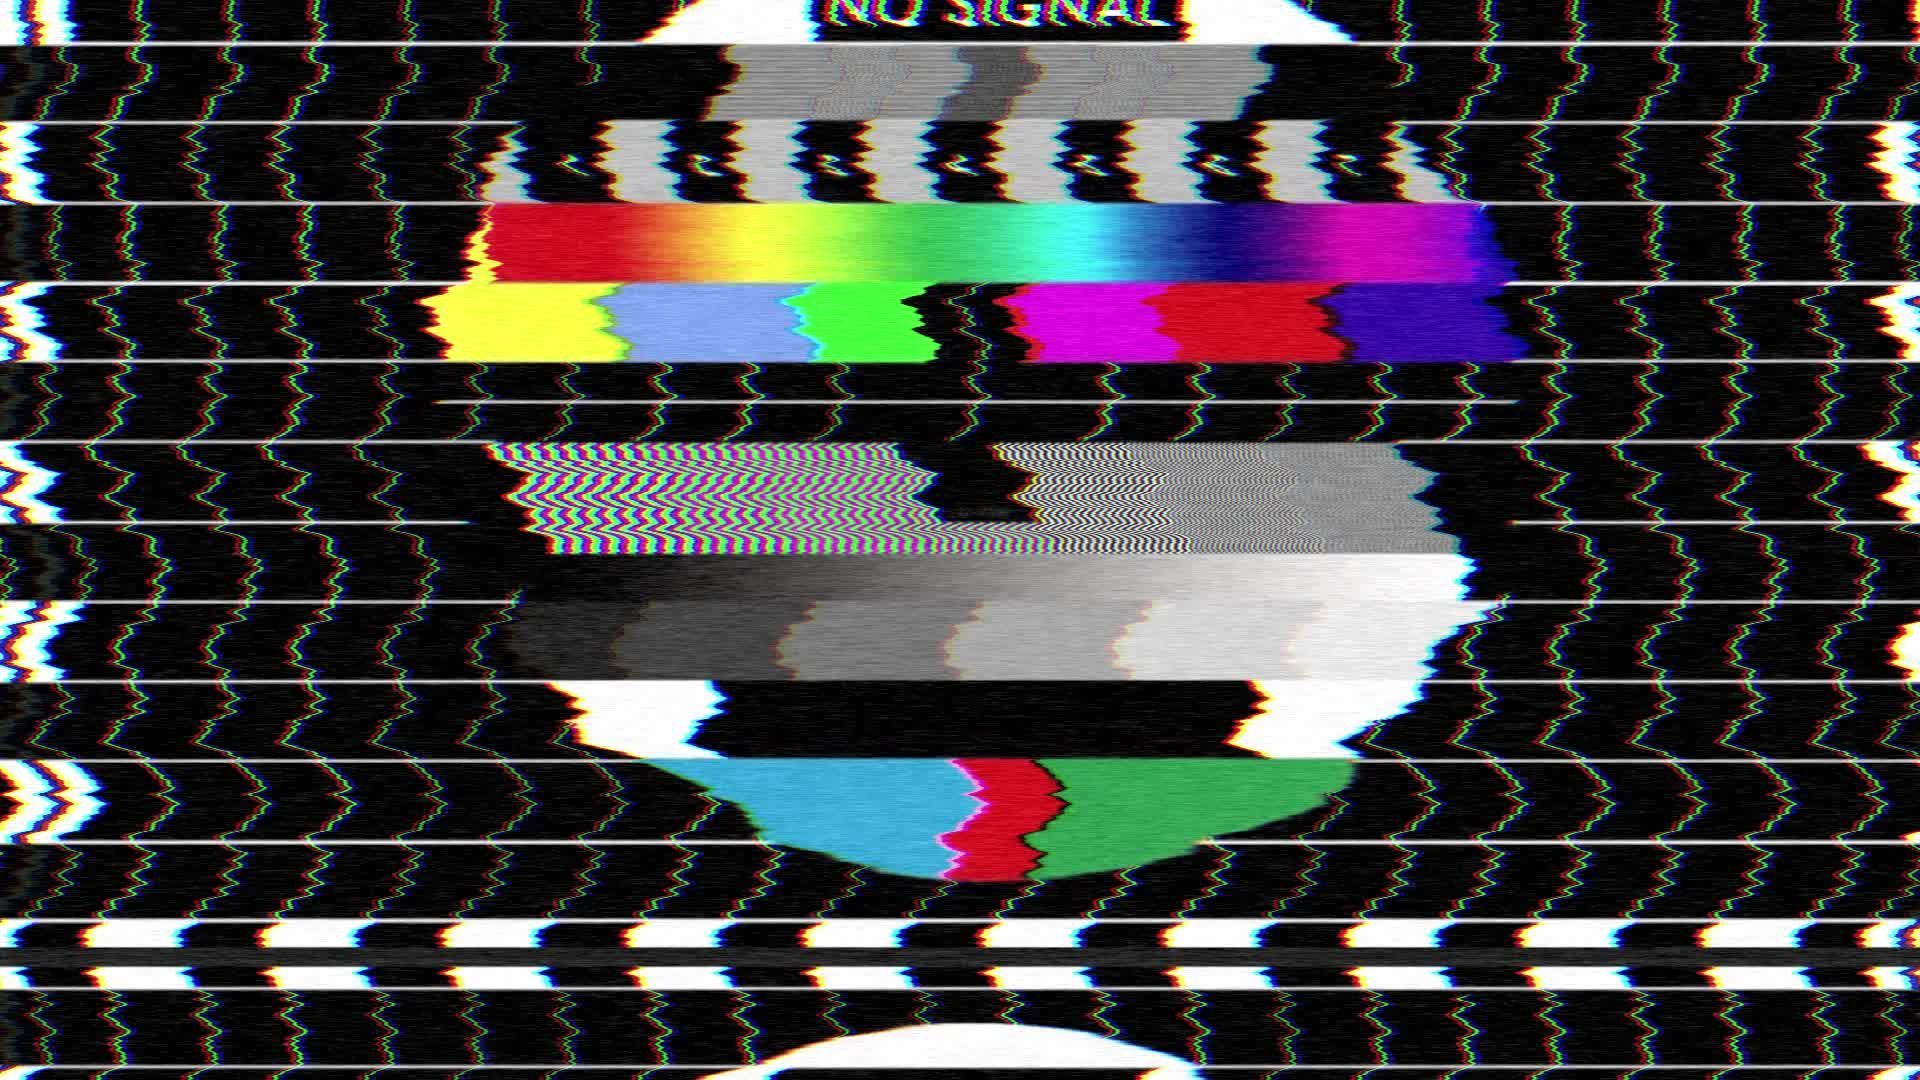 tv no signal art, Game inspiration, Typography poster